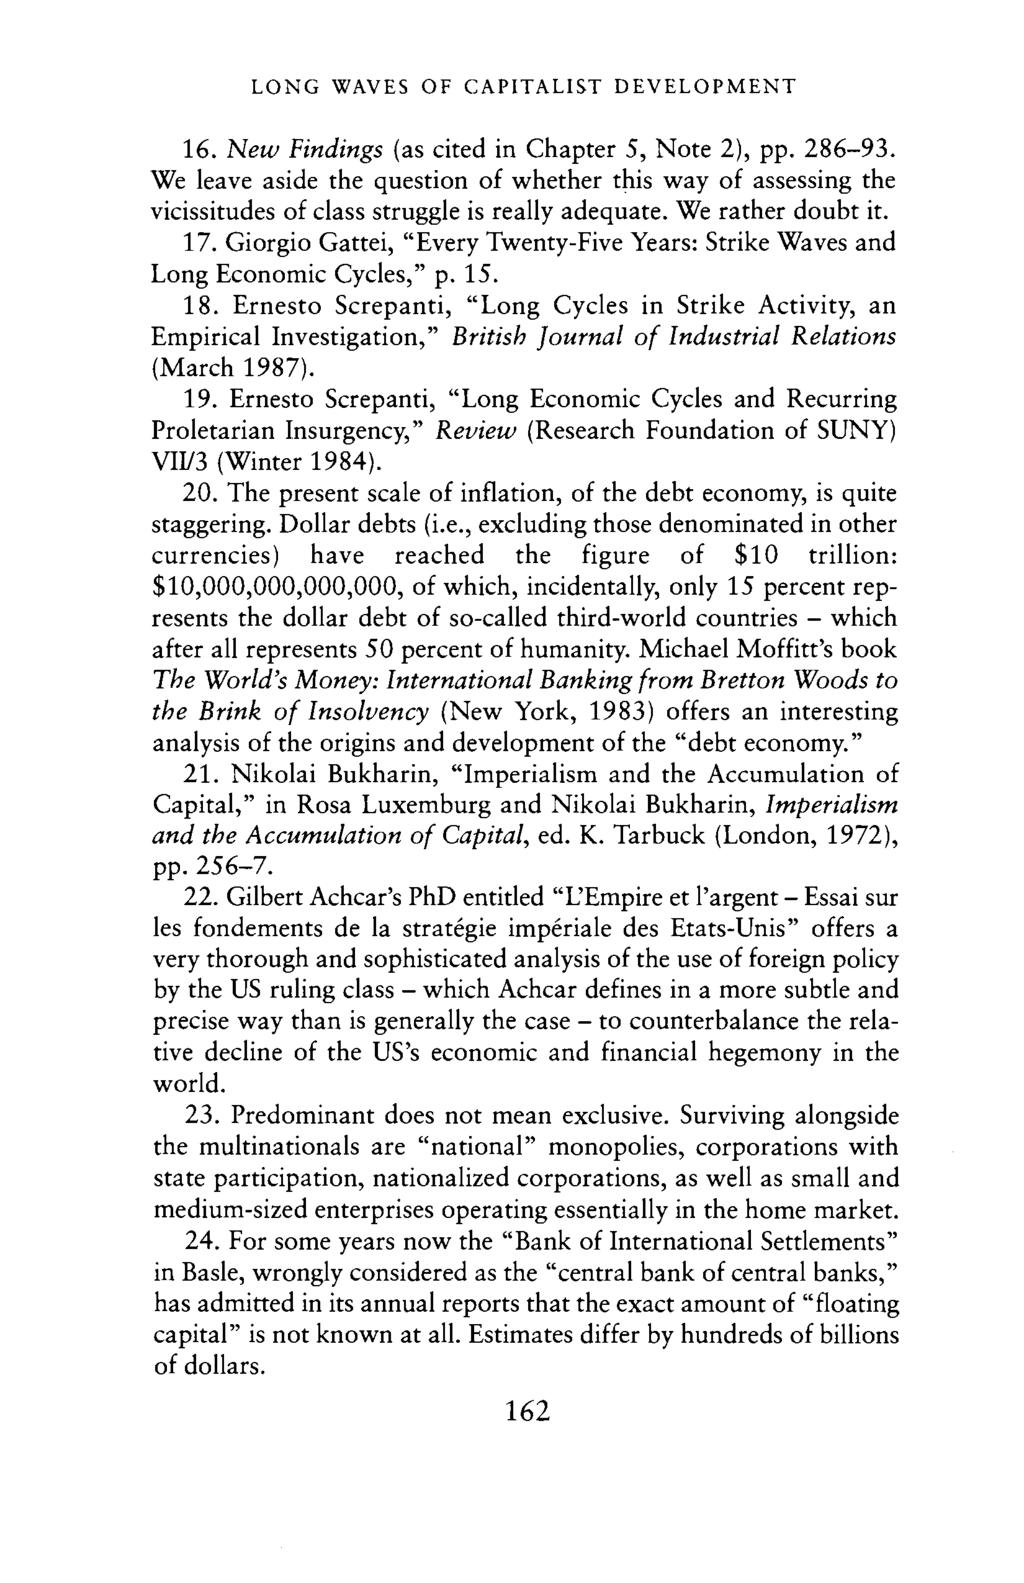 LONG WAVES OF CAPITALIST DEVELOPMENT 16. New Findings (as cited in Chapter 5, Note 2), pp. 286-93.